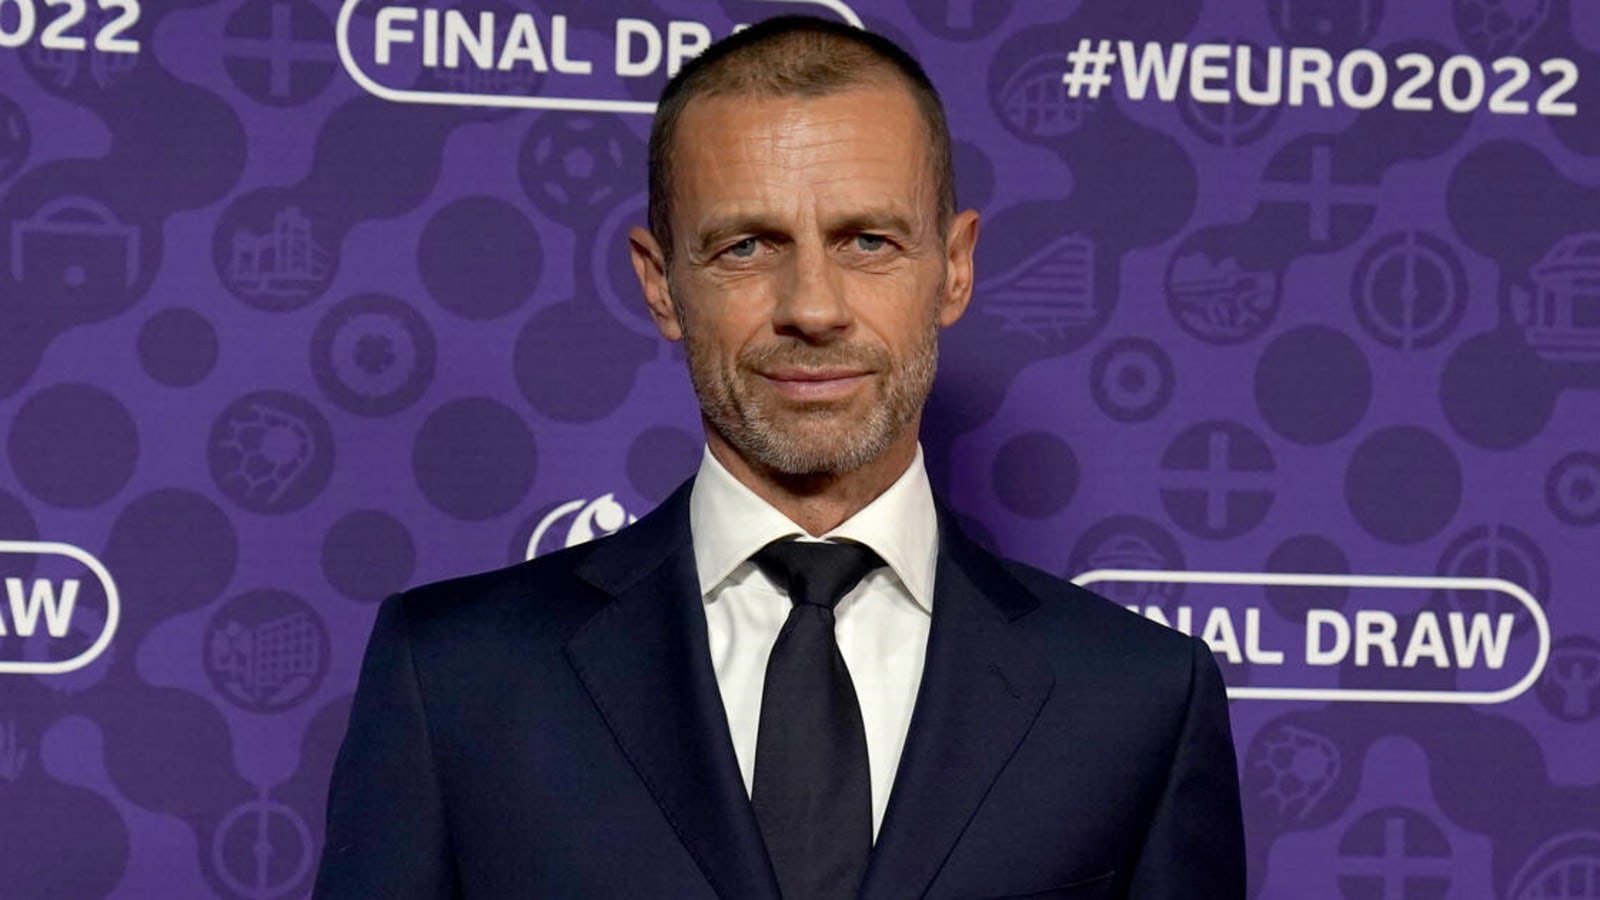 Biennial World Cup is ‘off the table,’ says UEFA president